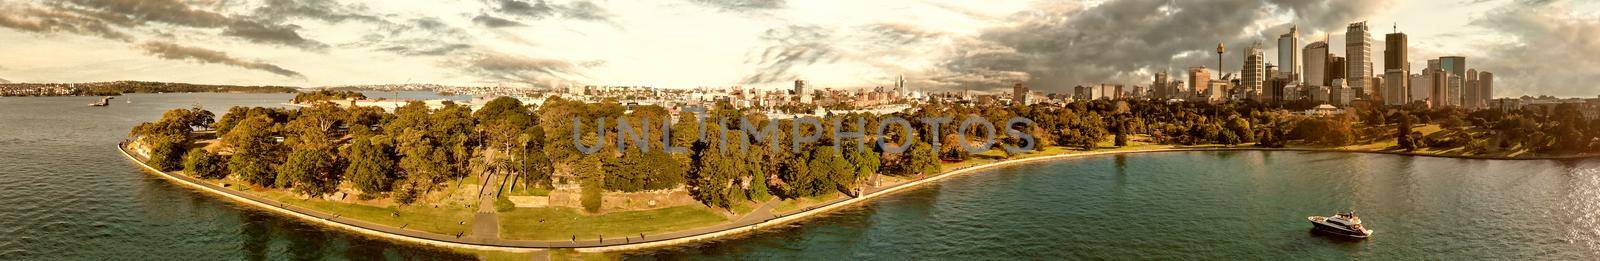 Panoramic aerial view of Sydney from Sydney Harbour Bay.